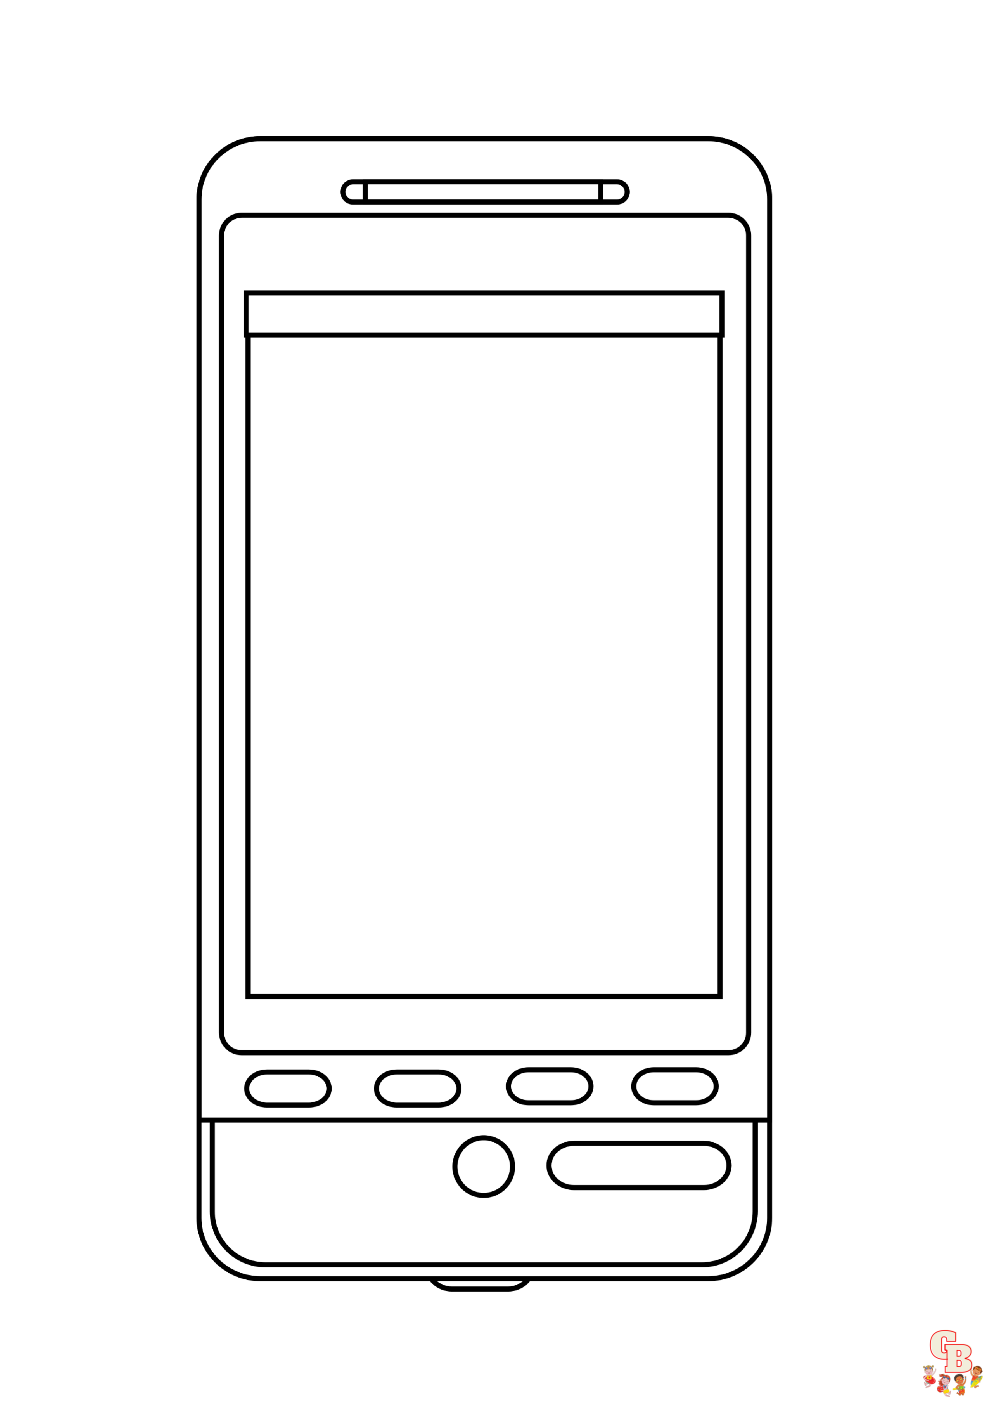 Phone Coloring Pages